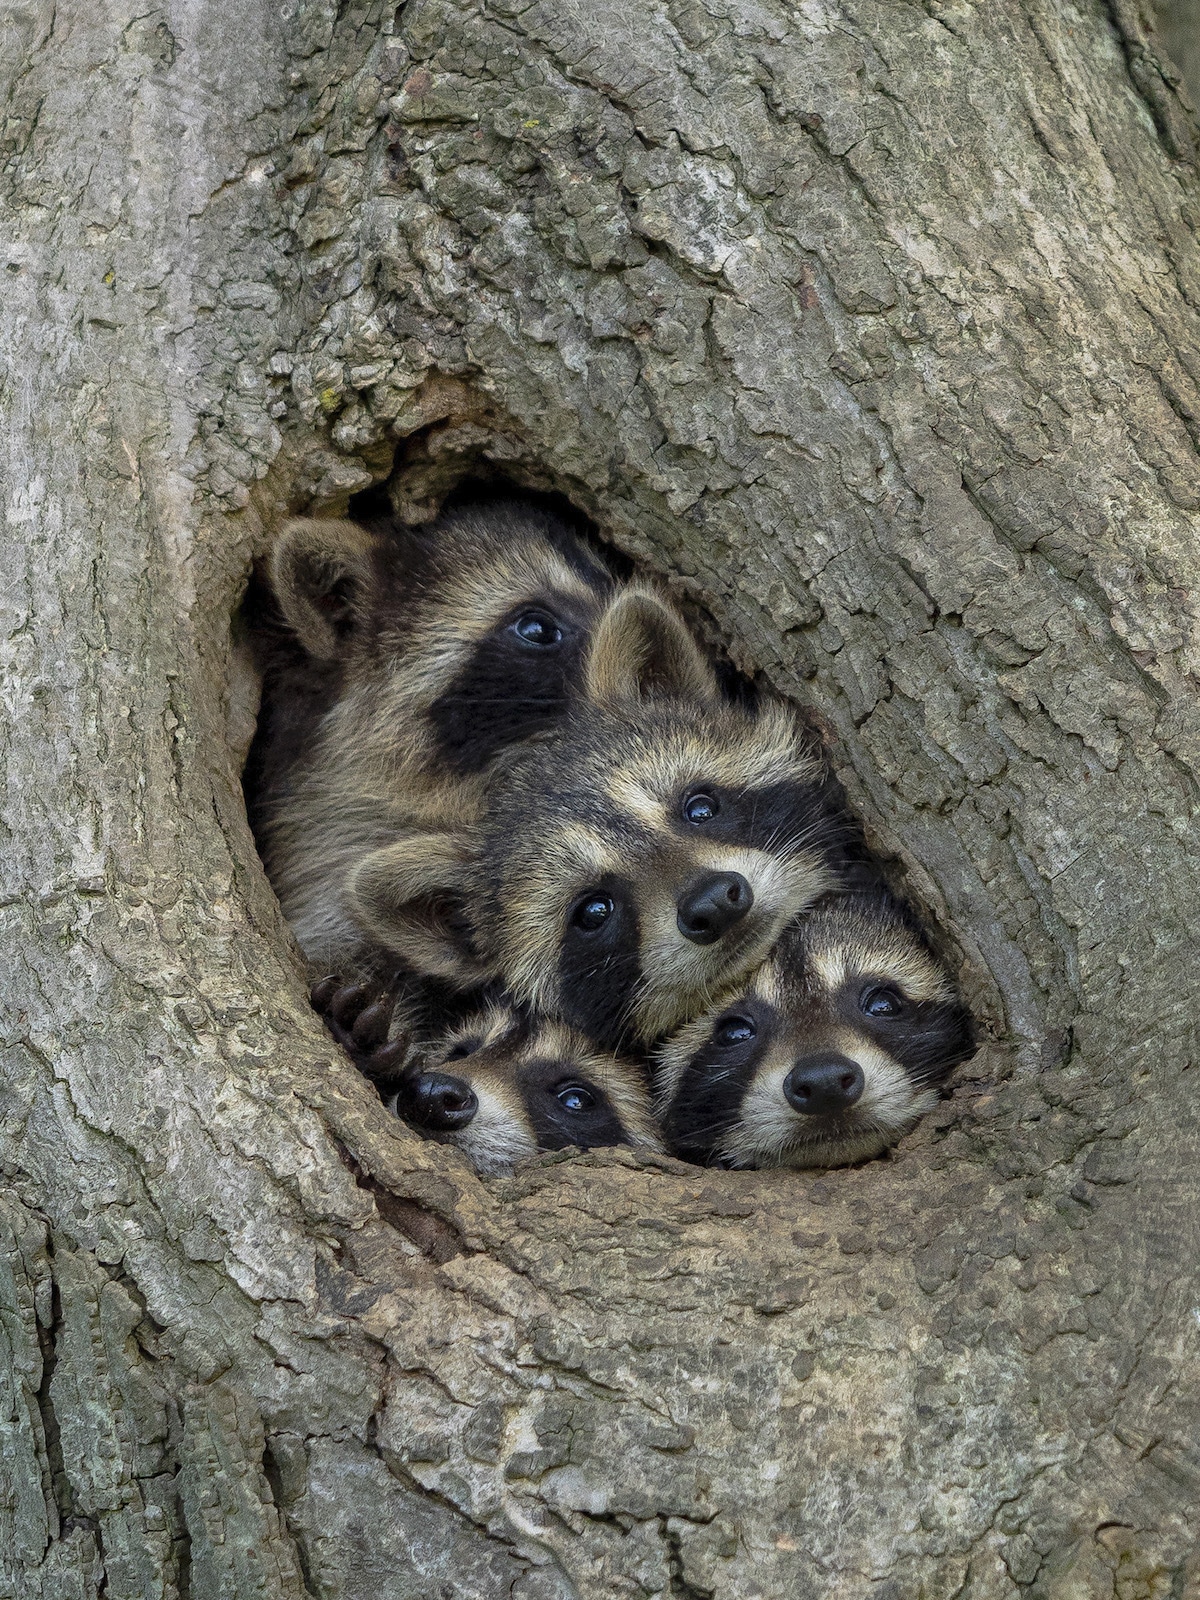 Raccoon Family Sticking Their Heads Out of Hole in a Tree